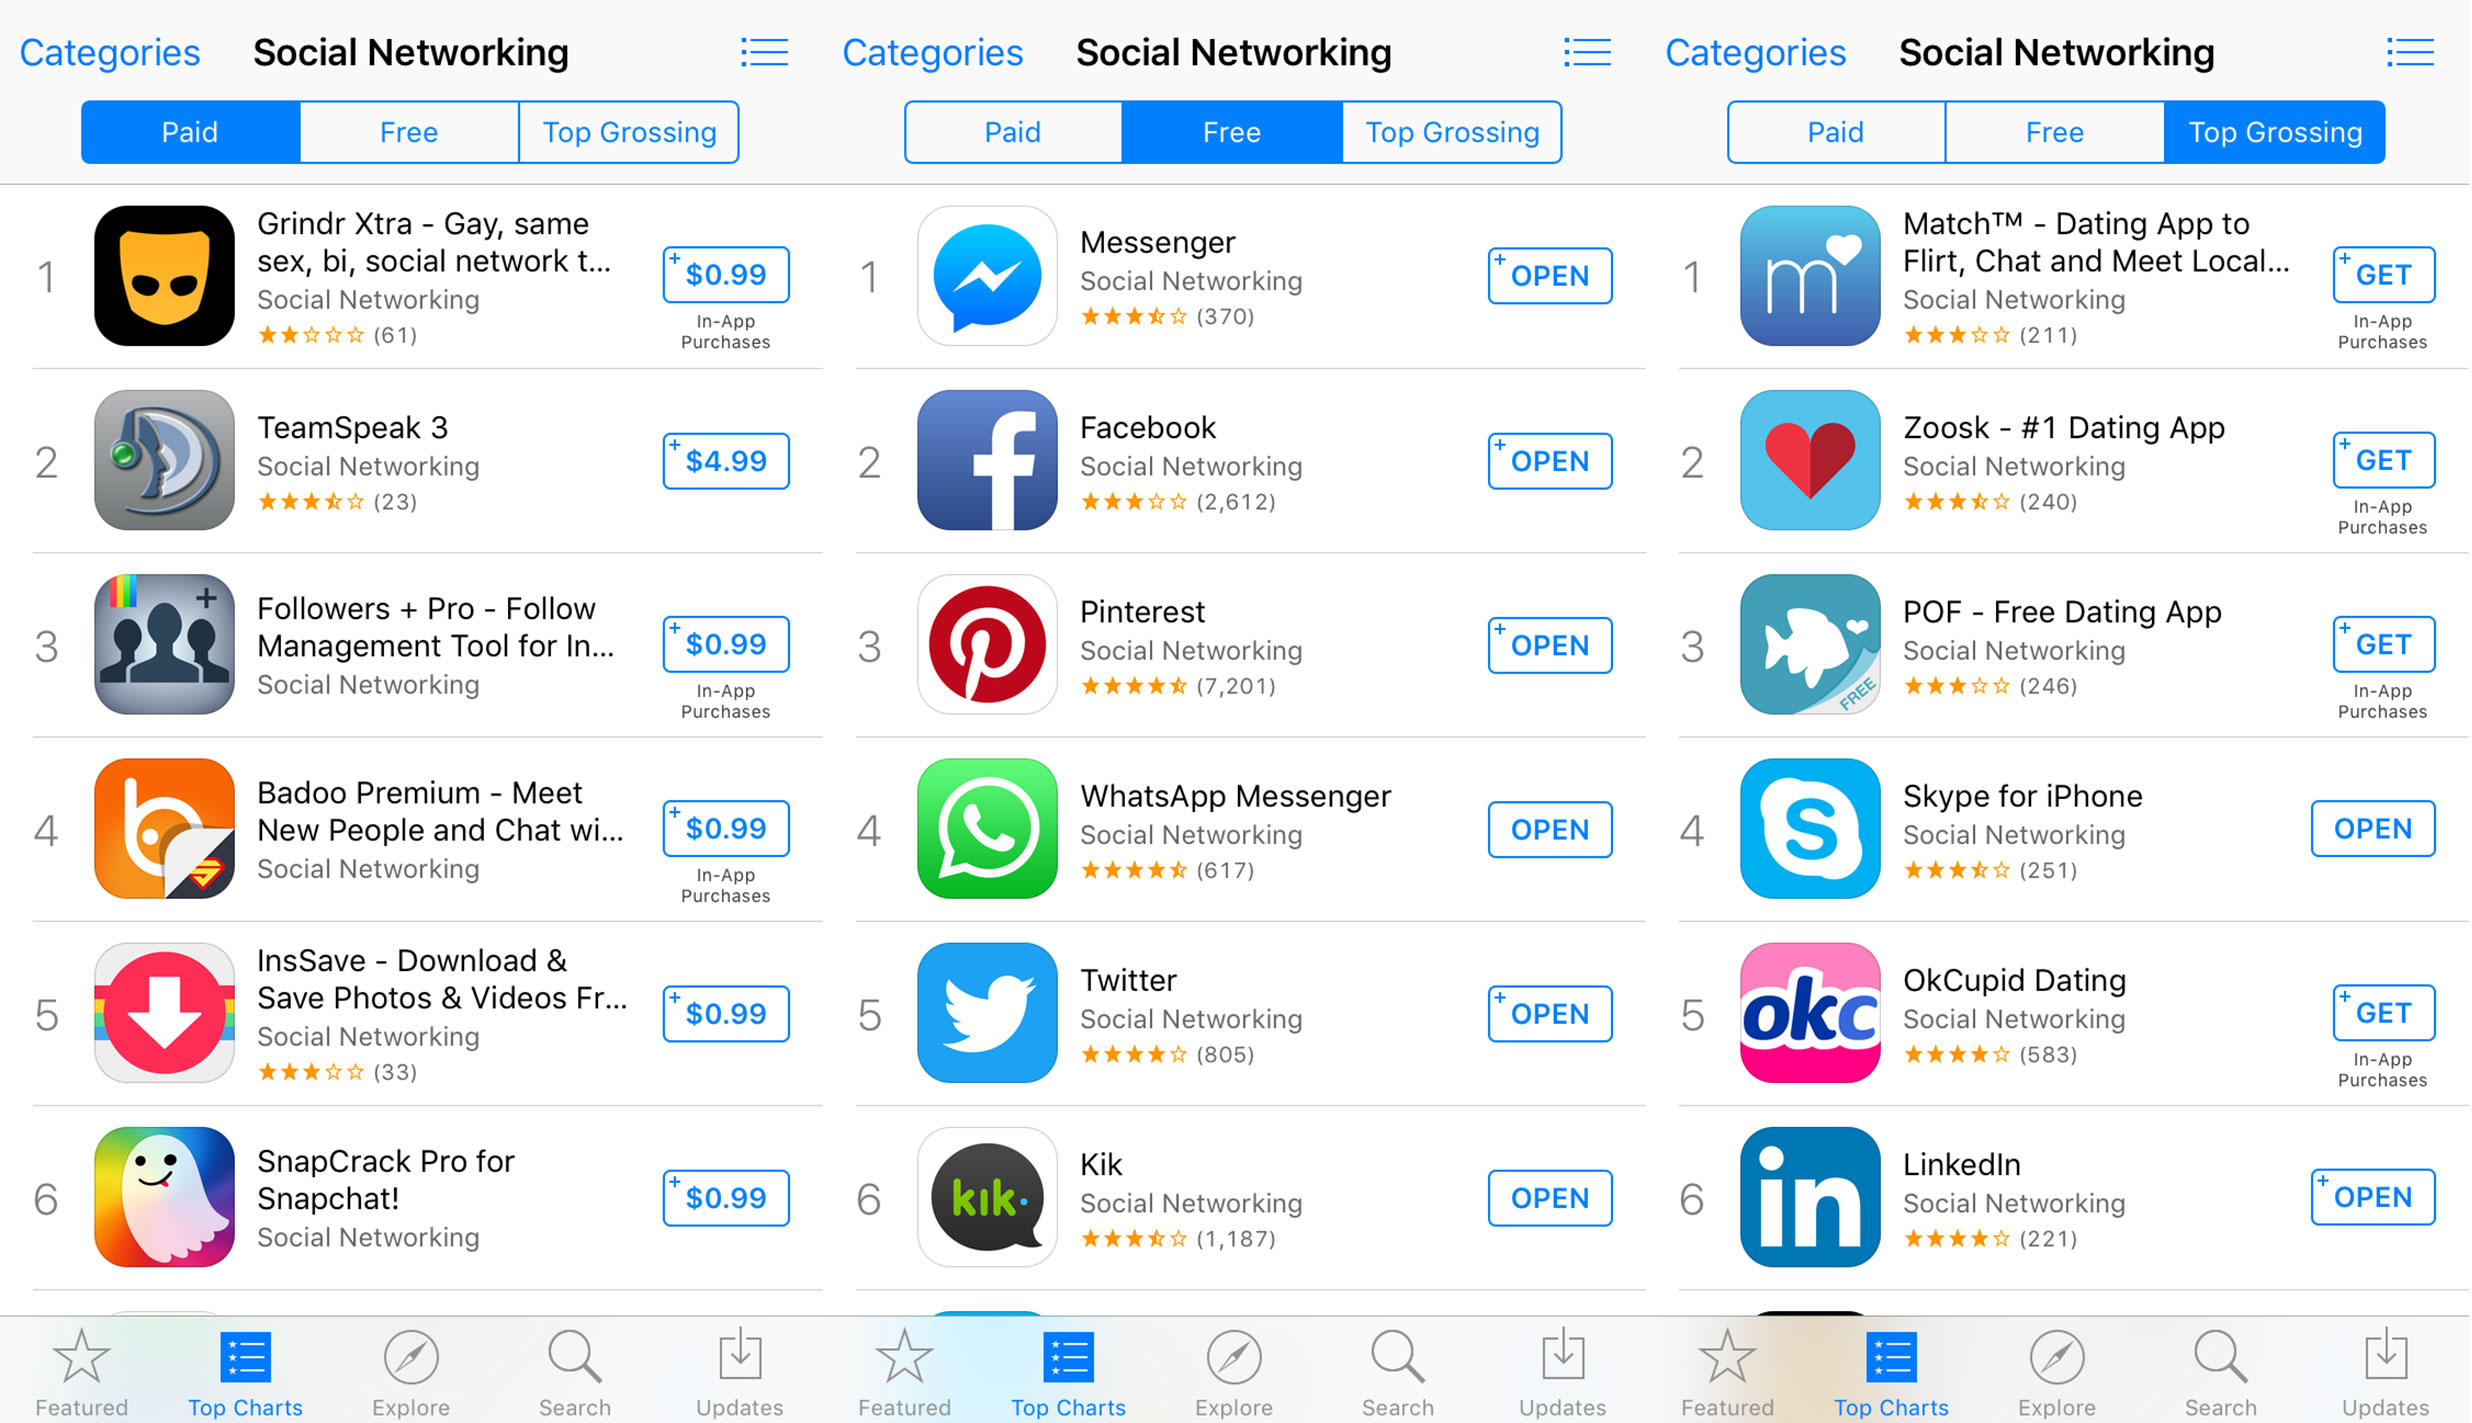 mobile app analytics on social networking apps